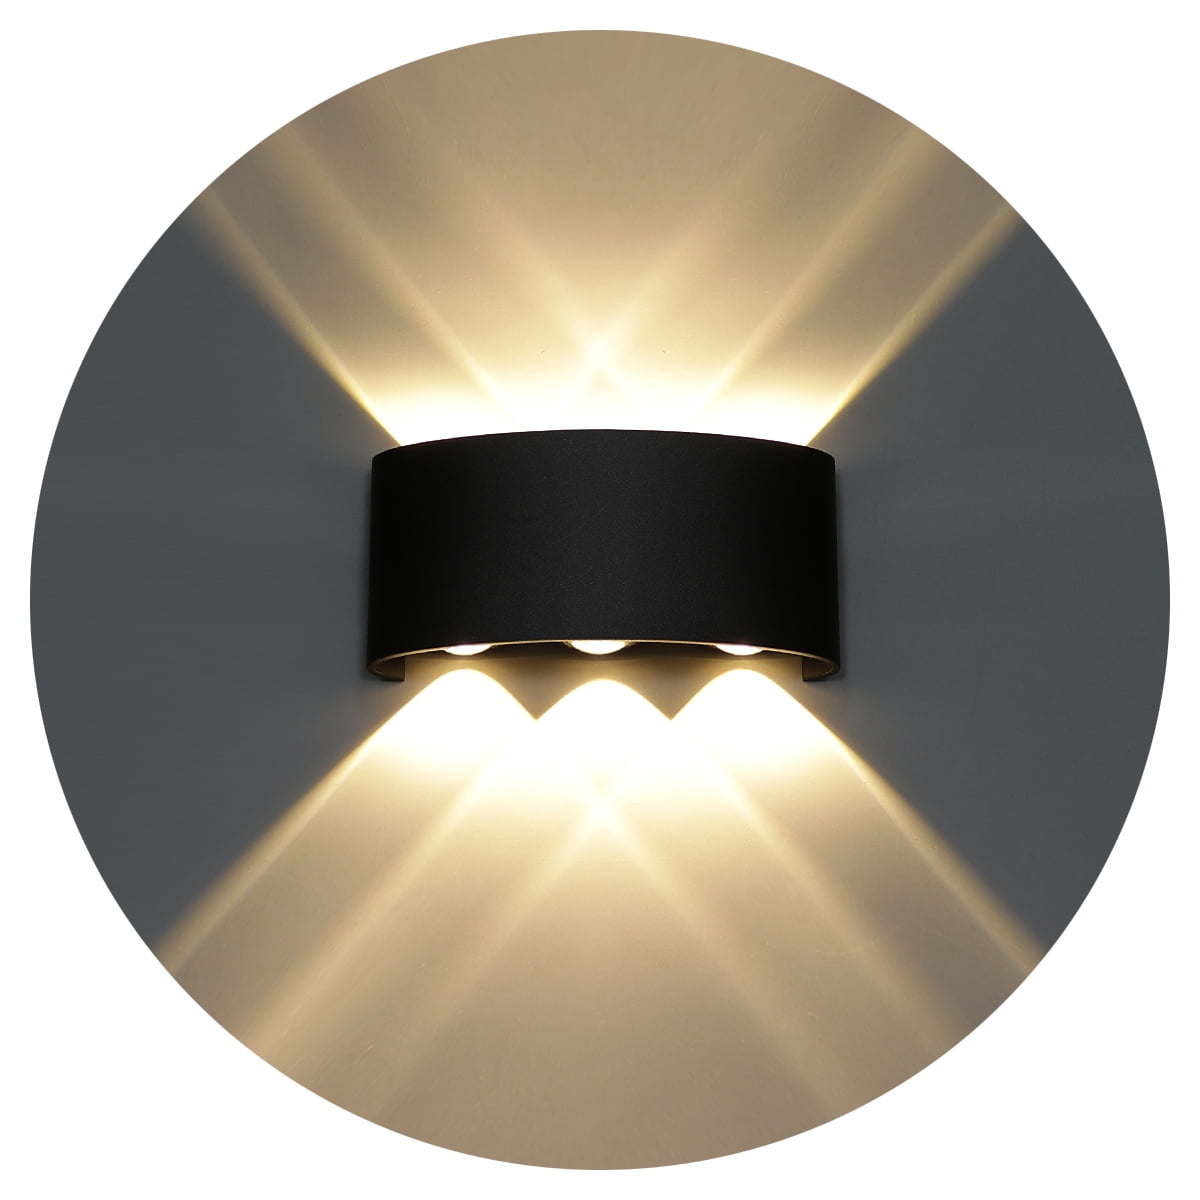 LED Wall Lights Modern Up Down Sconce Lighting Fixture Lamp Indoor Outdoor 